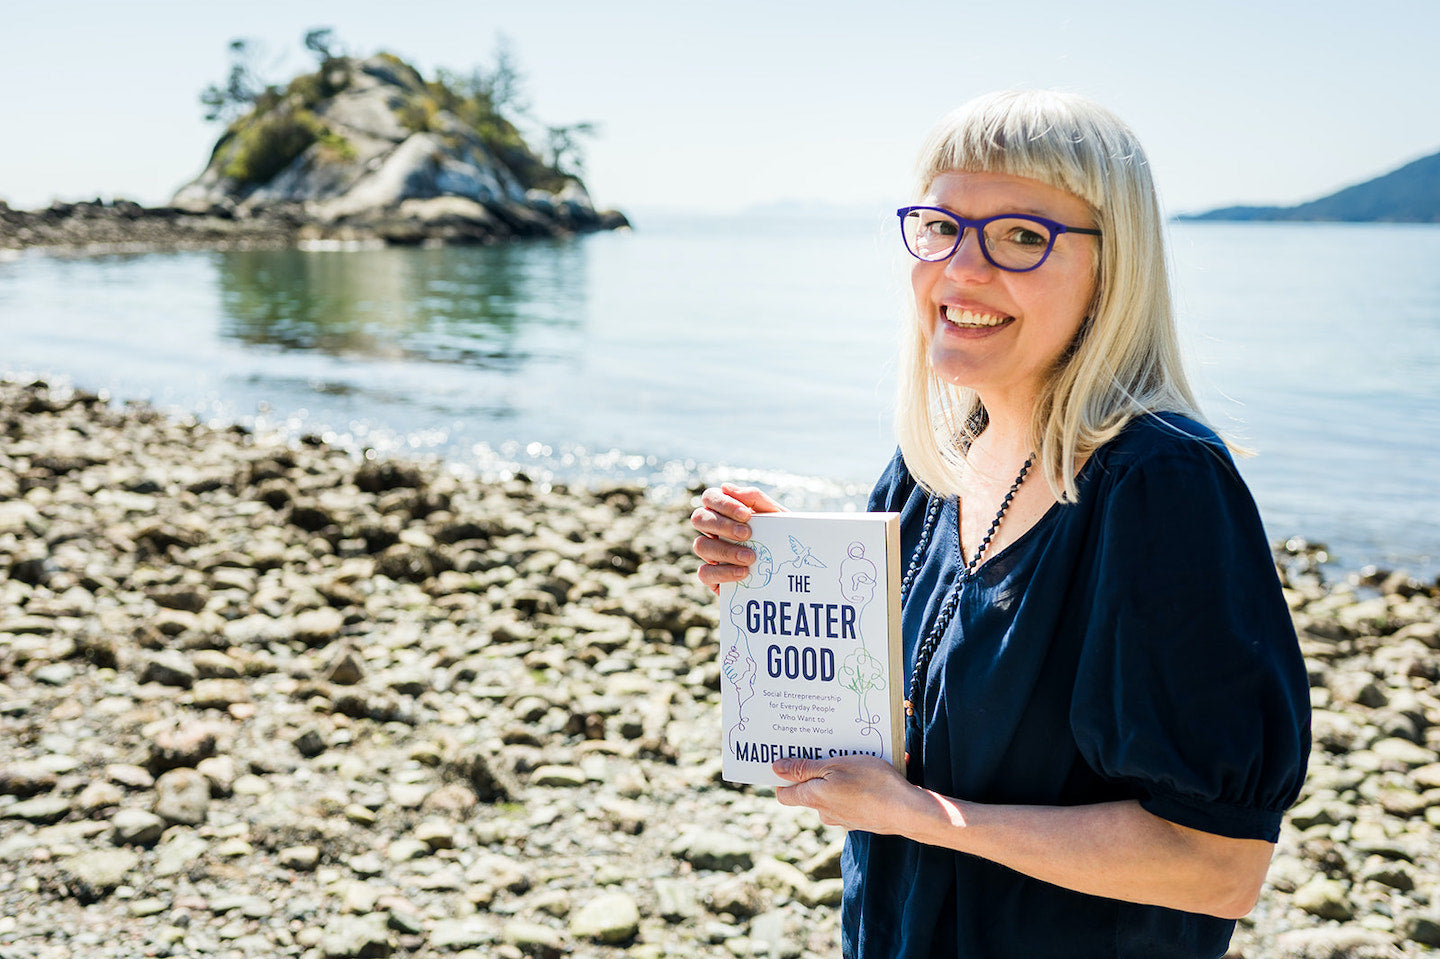 Madeleine Shaw stands on a beach holding a copy of her book, The Greater Good. She is smiling at the camera.